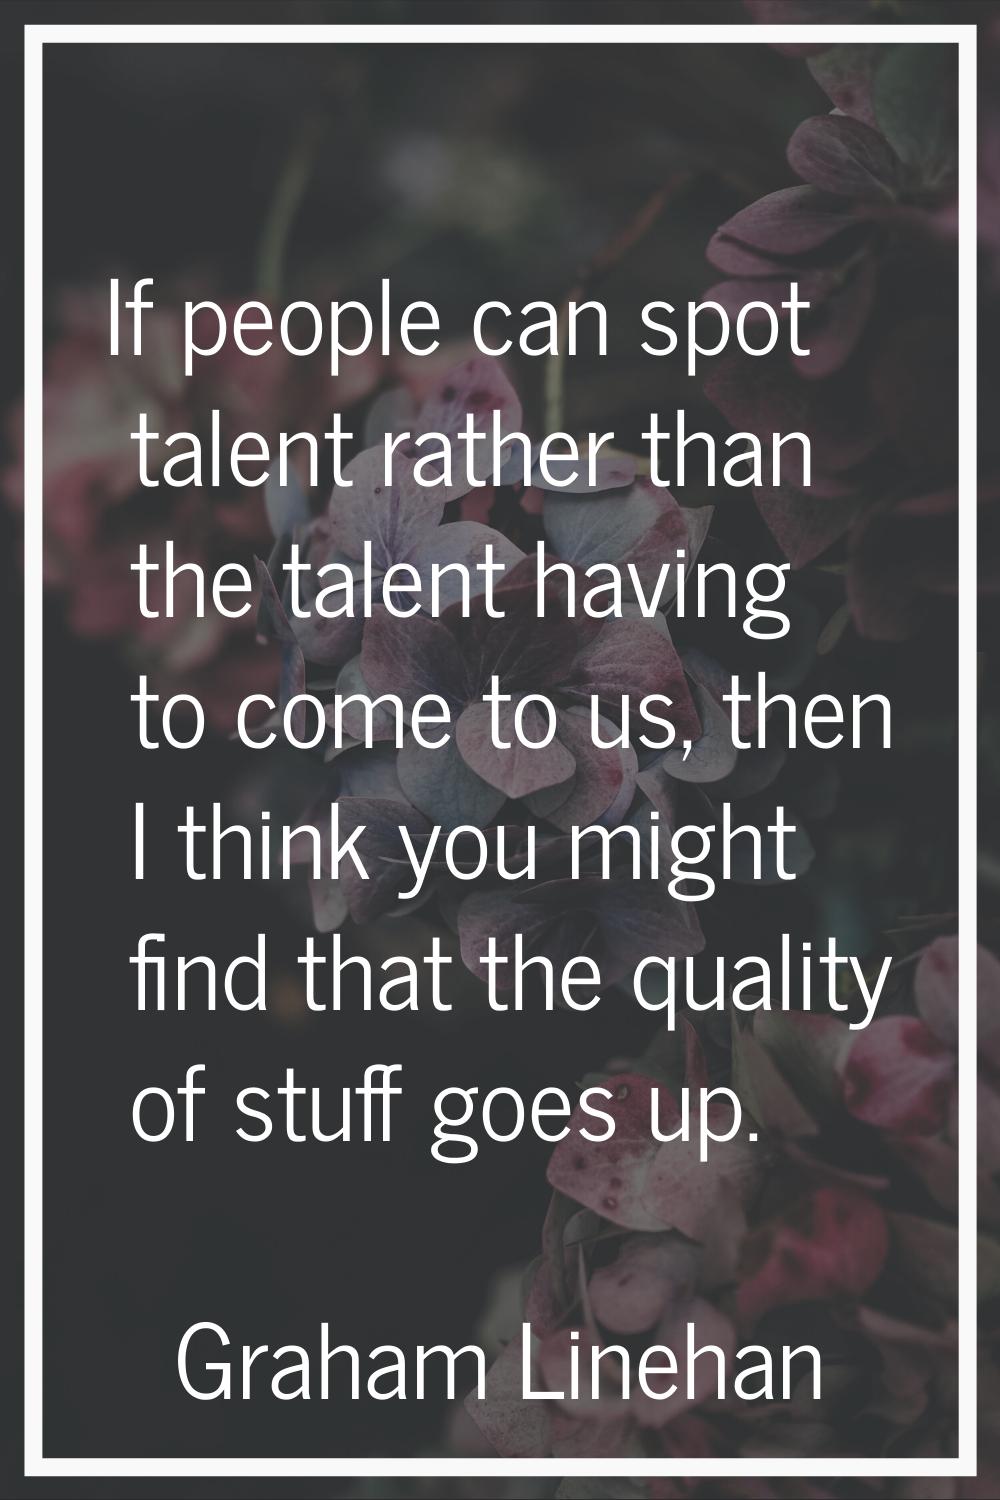 If people can spot talent rather than the talent having to come to us, then I think you might find 